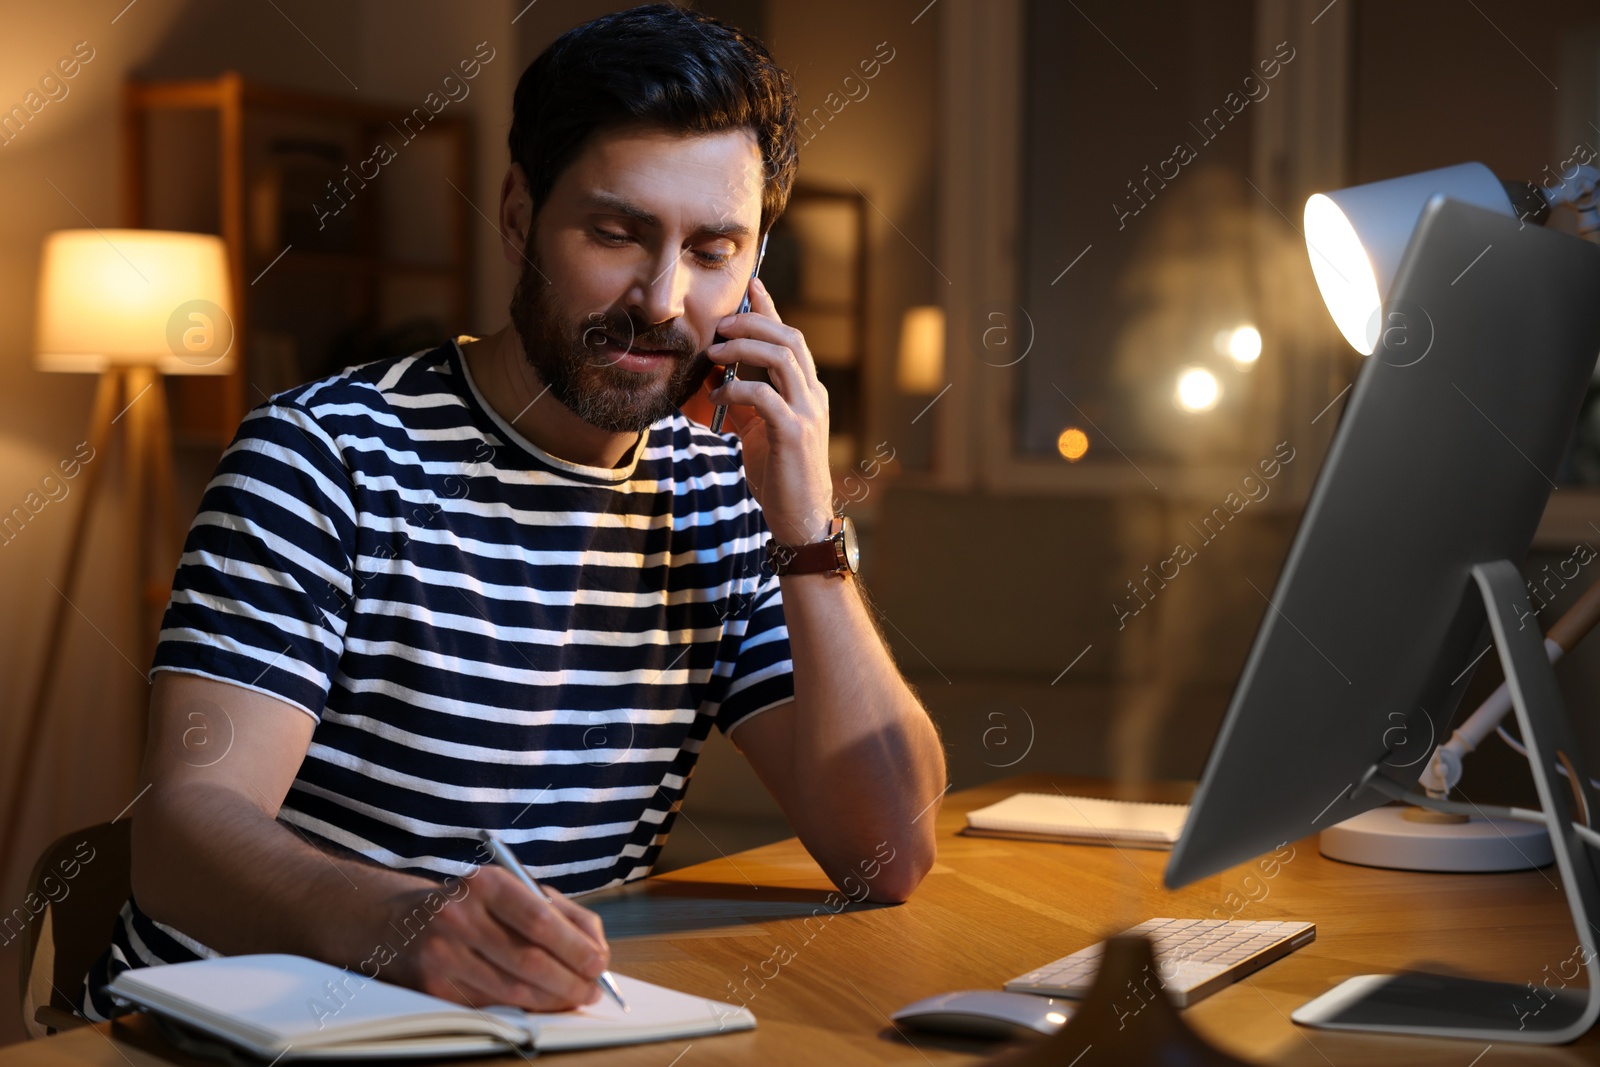 Photo of Home workplace. Man taking notes while talking on smartphone at wooden desk in room at night